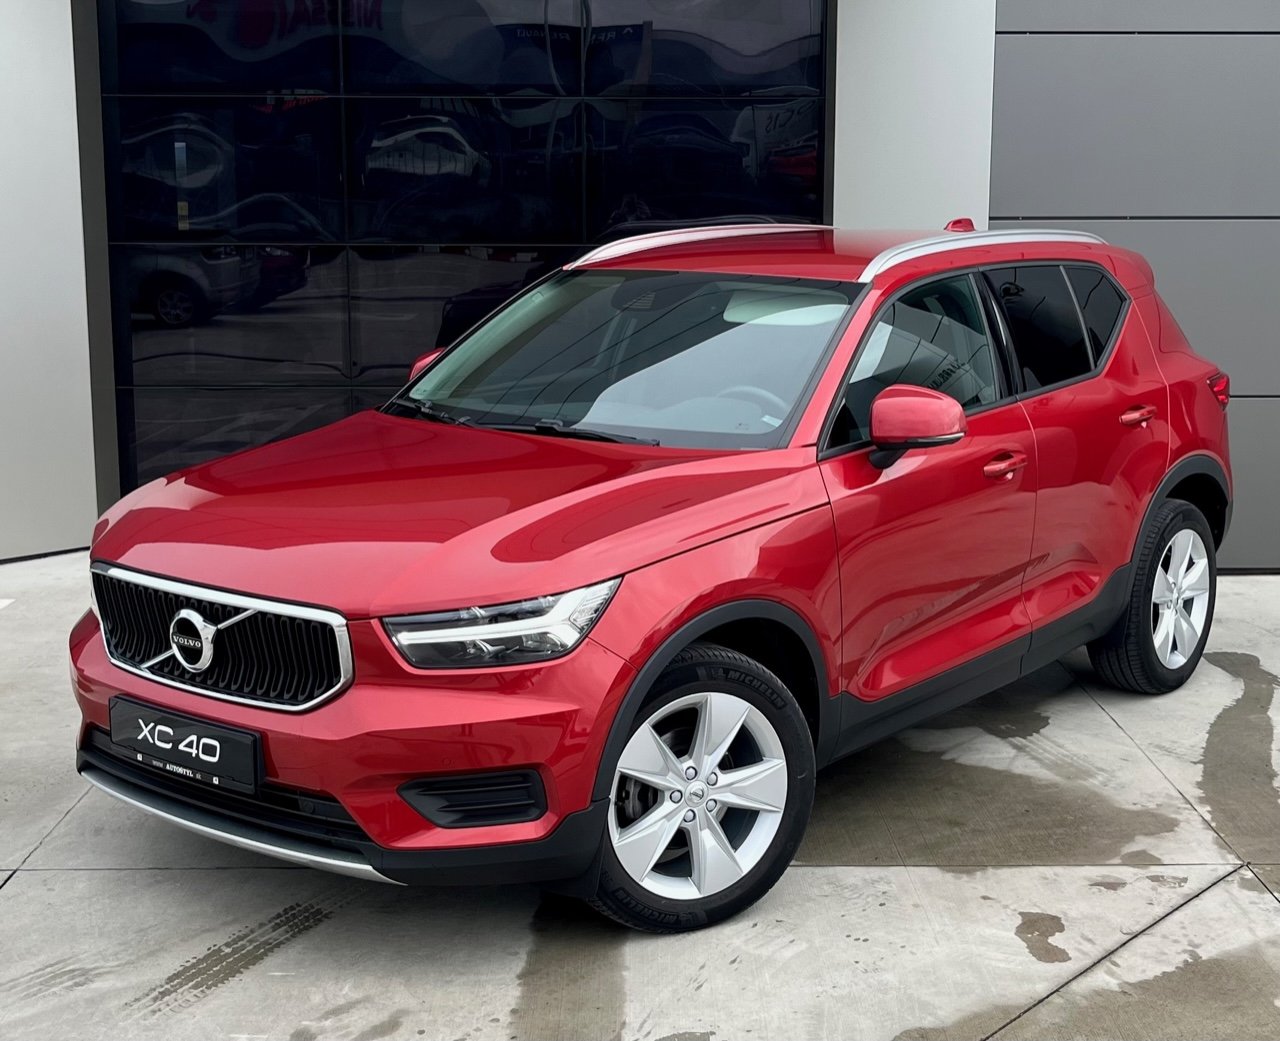 Volvo XC40 D3 FWD AT8 MOMENTUM